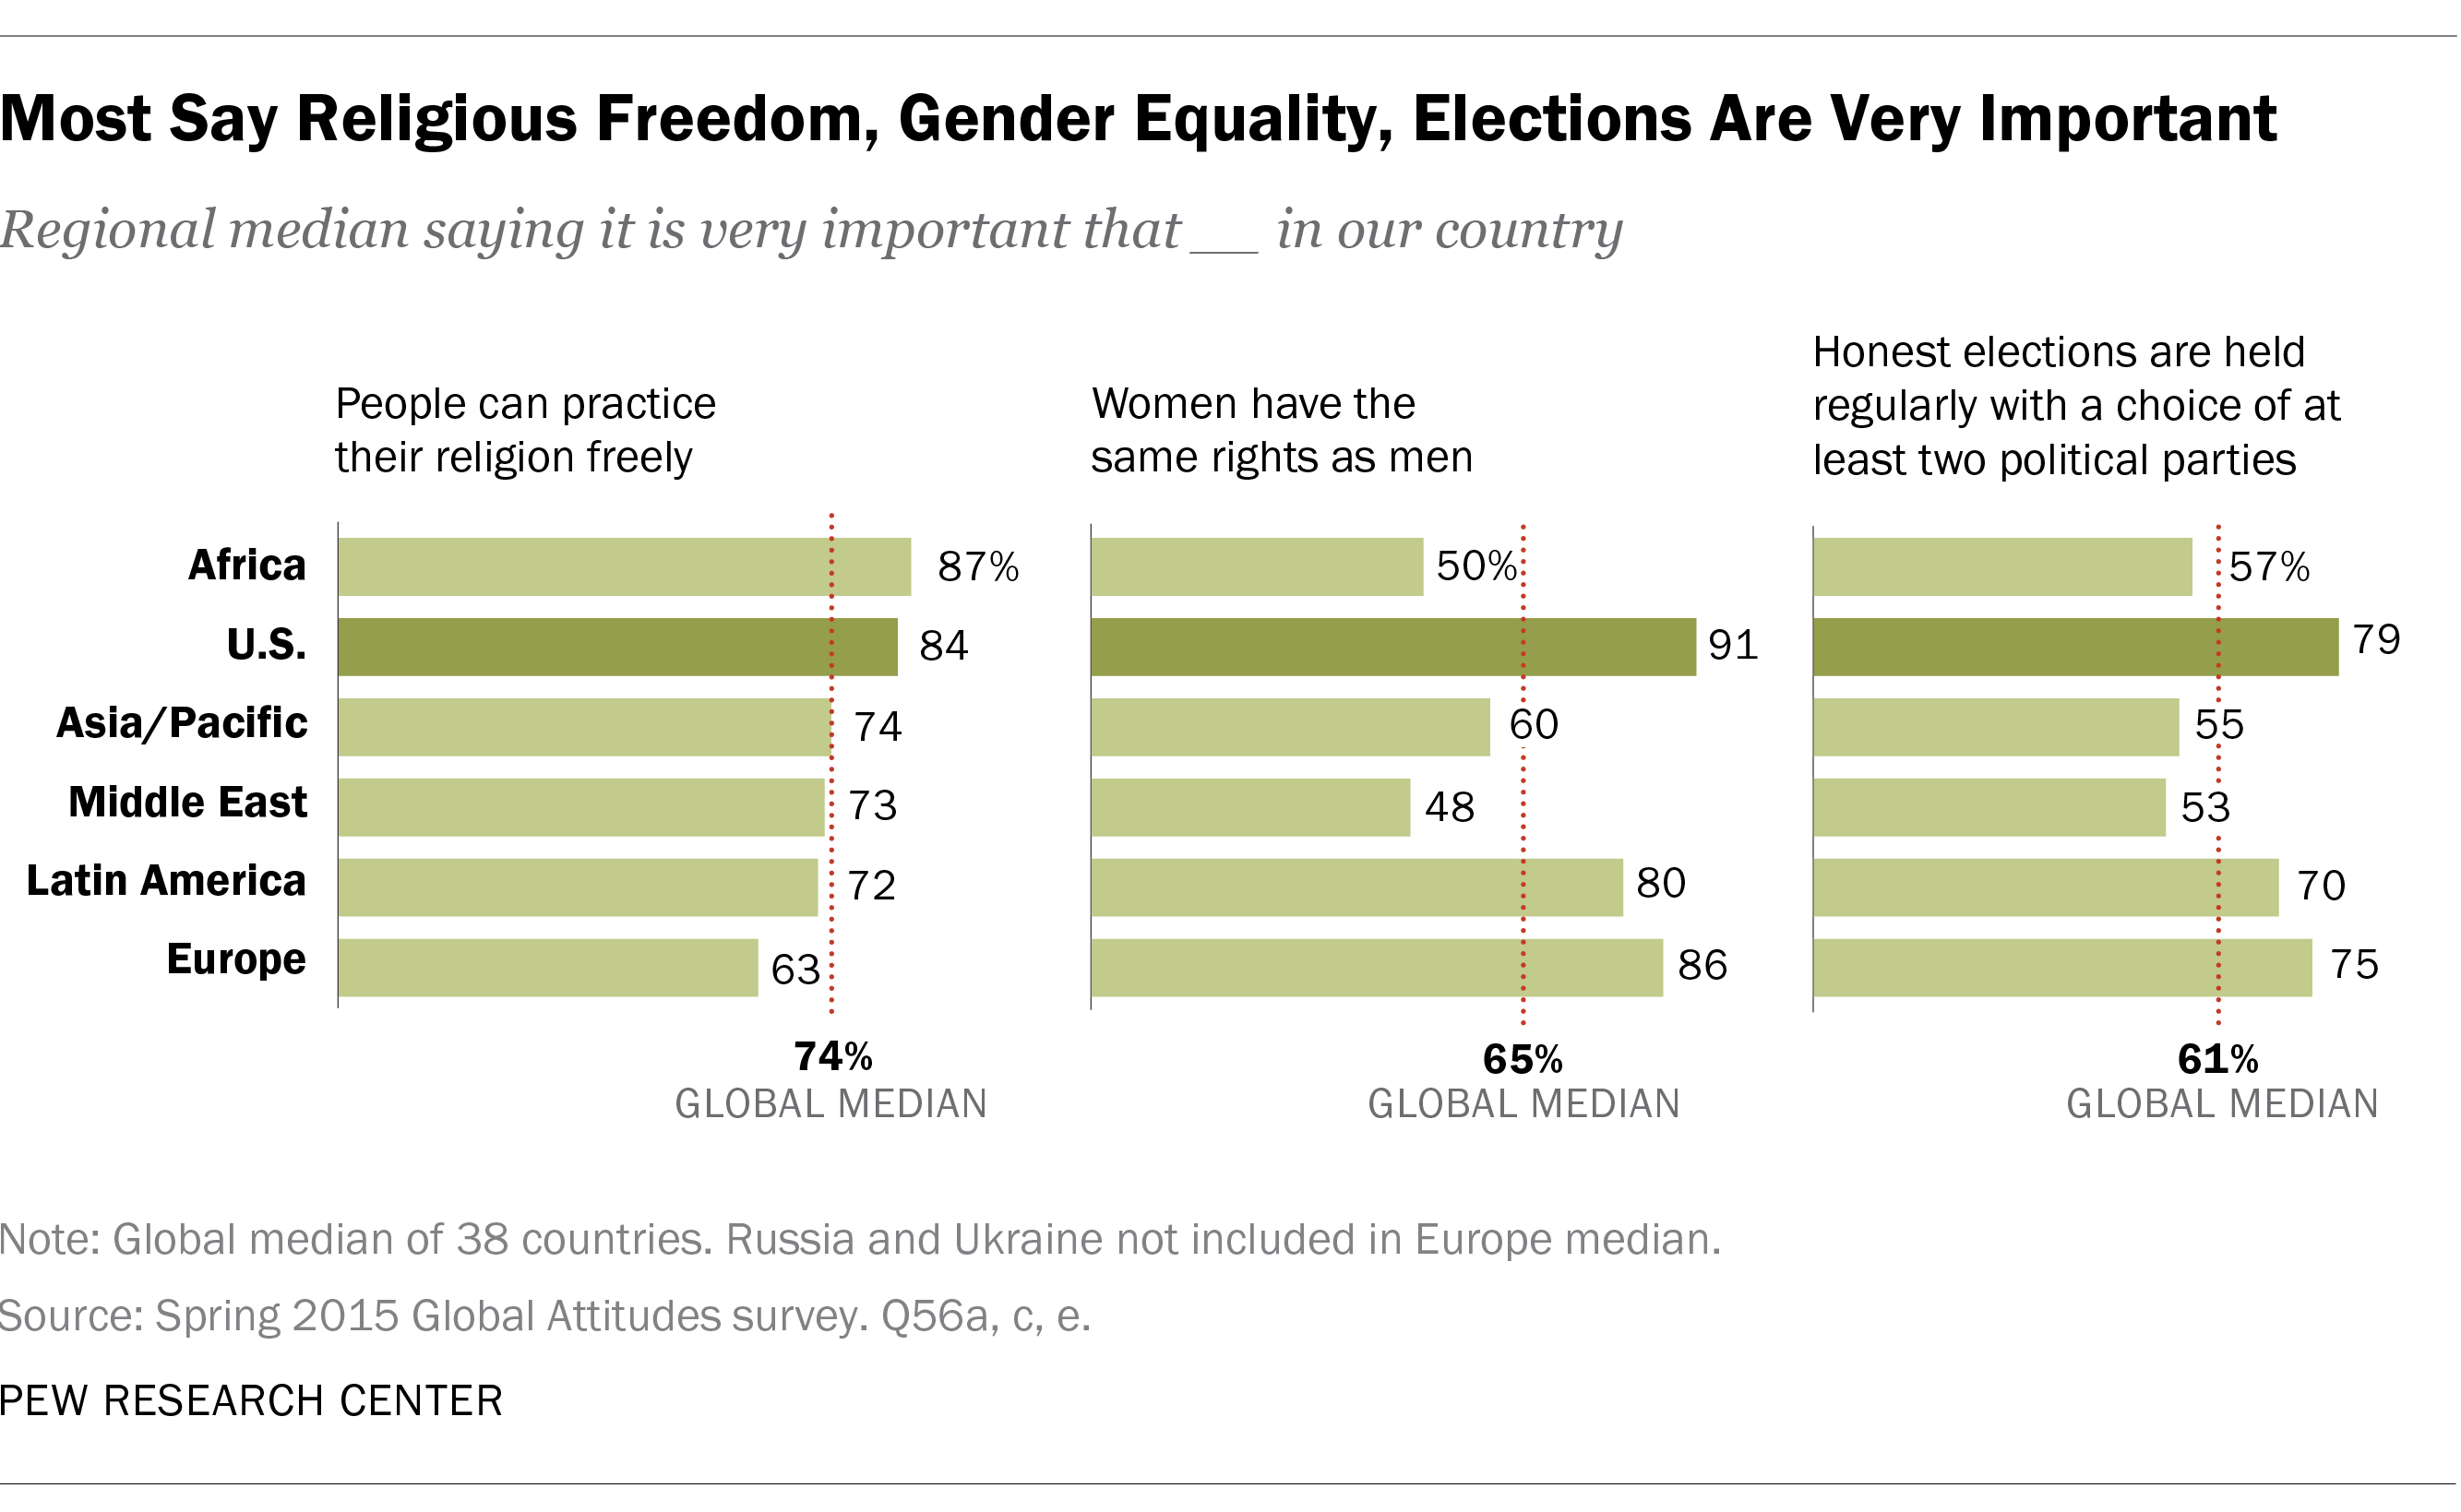 Most Say Religious Freedom, Gender Equality, Elections Are Very Important